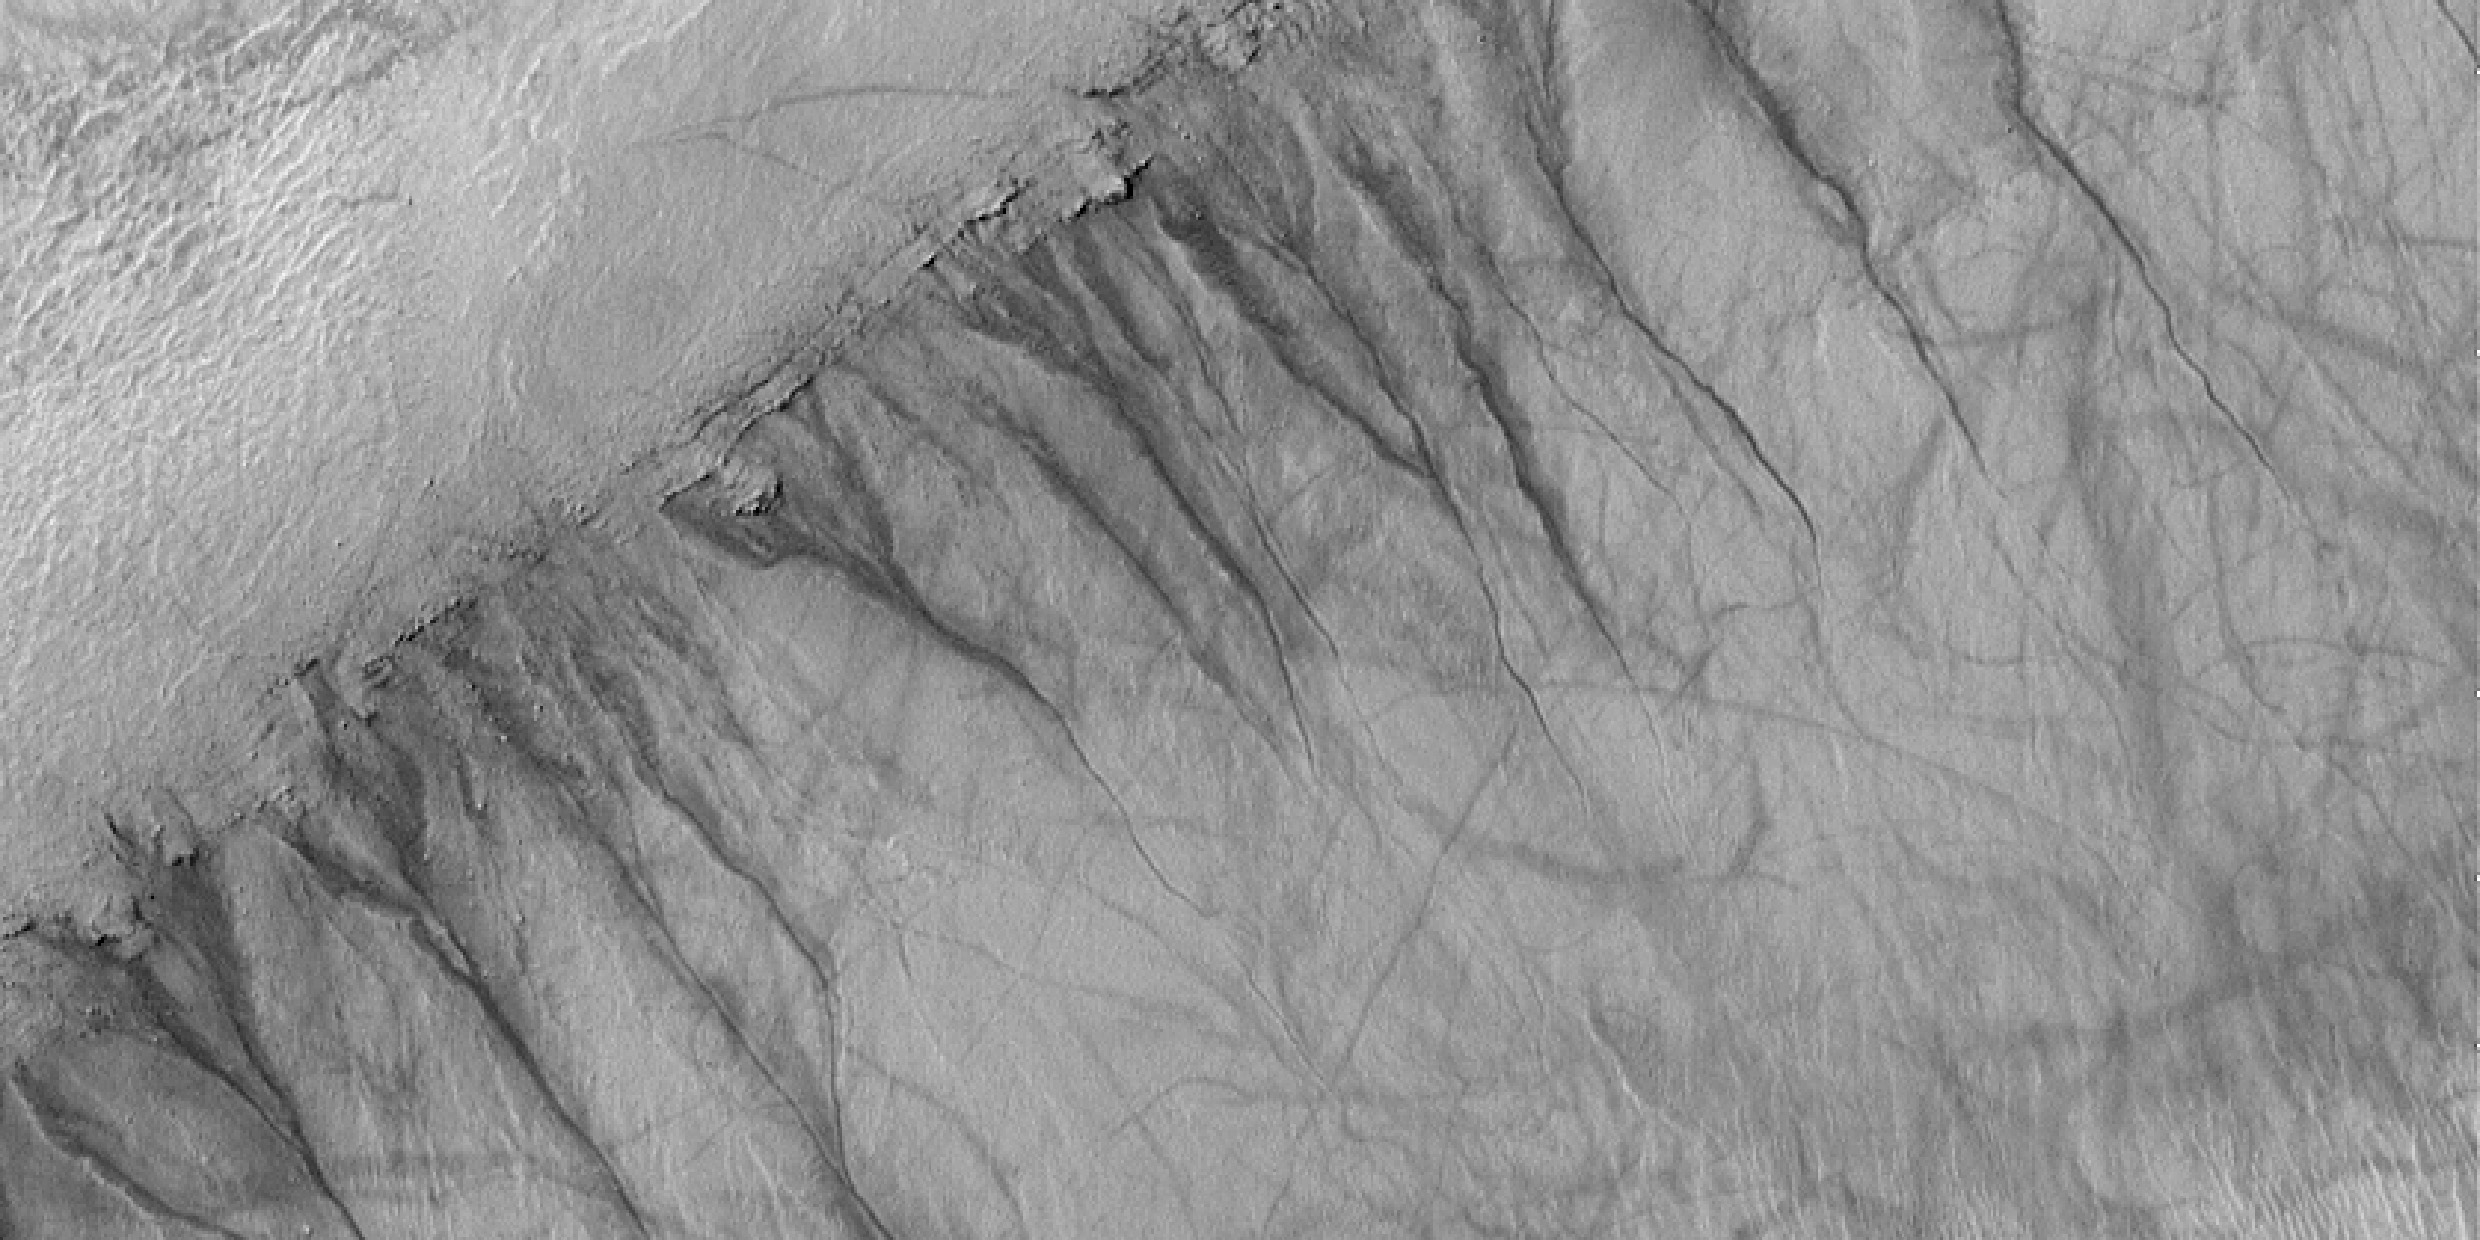 Satellite image of dark streaks running down sides of crater wall on surface of Mars